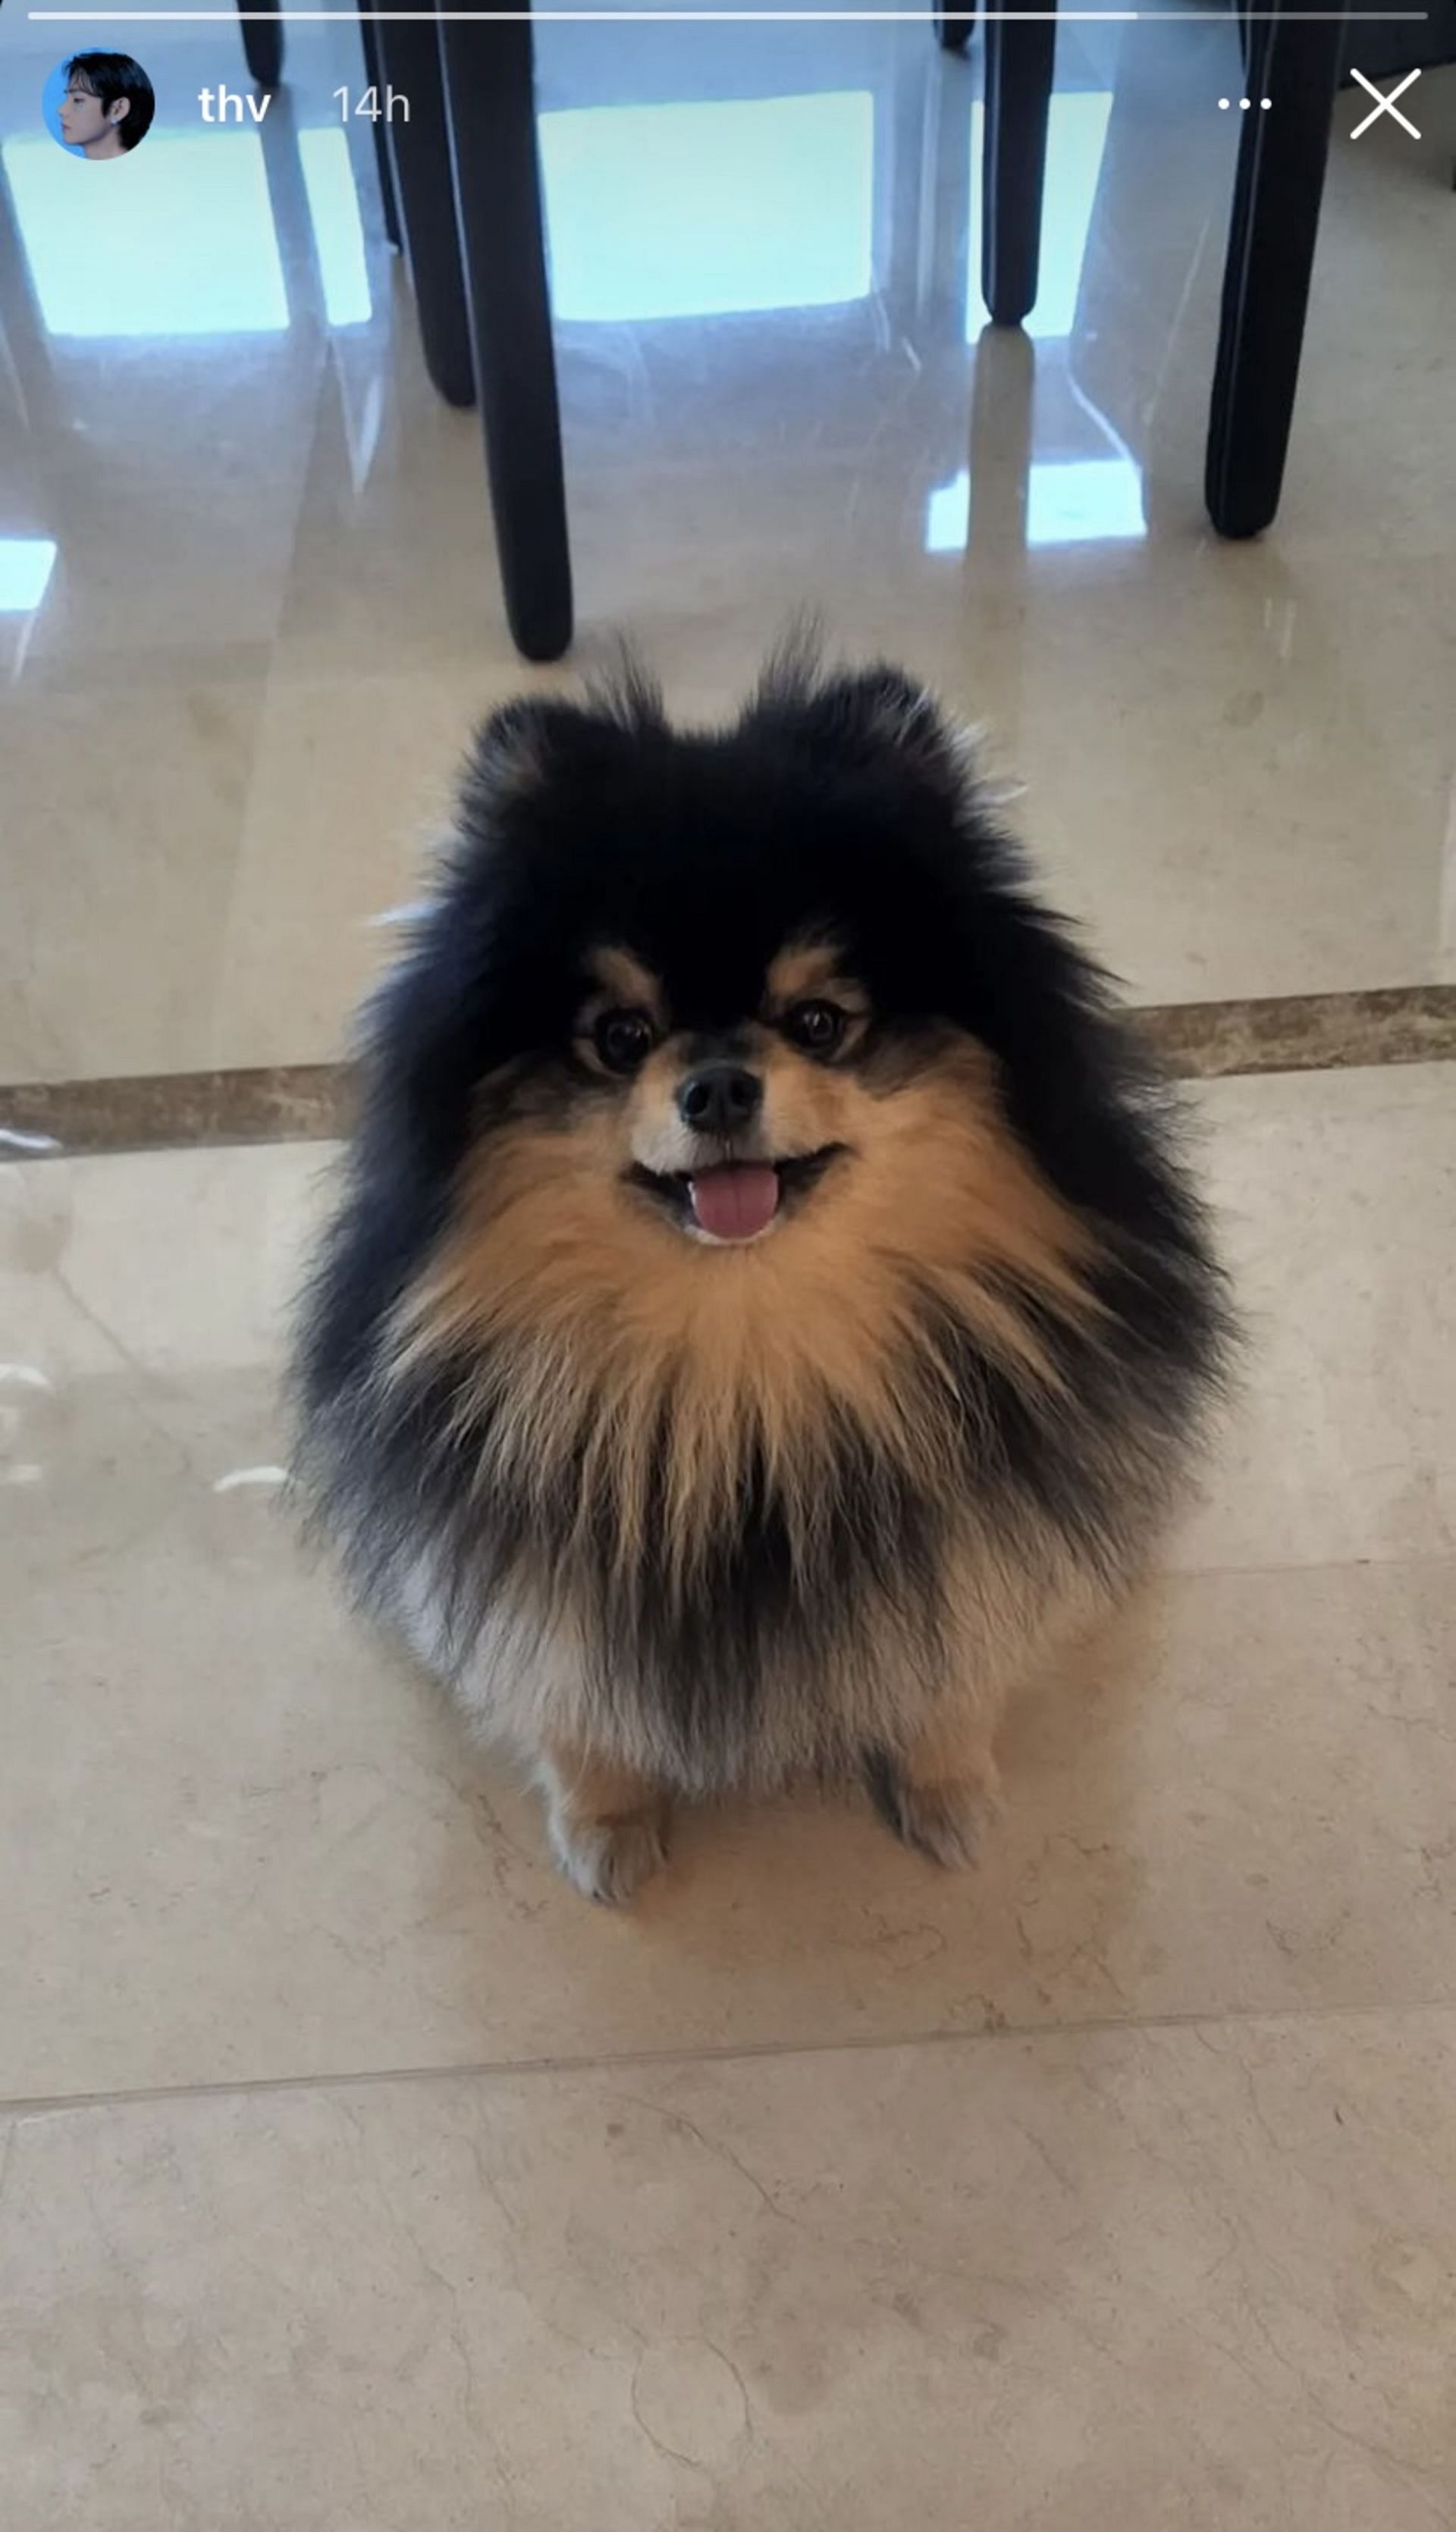 Latest update picture of Yeontan (Image via Instagram/thv)